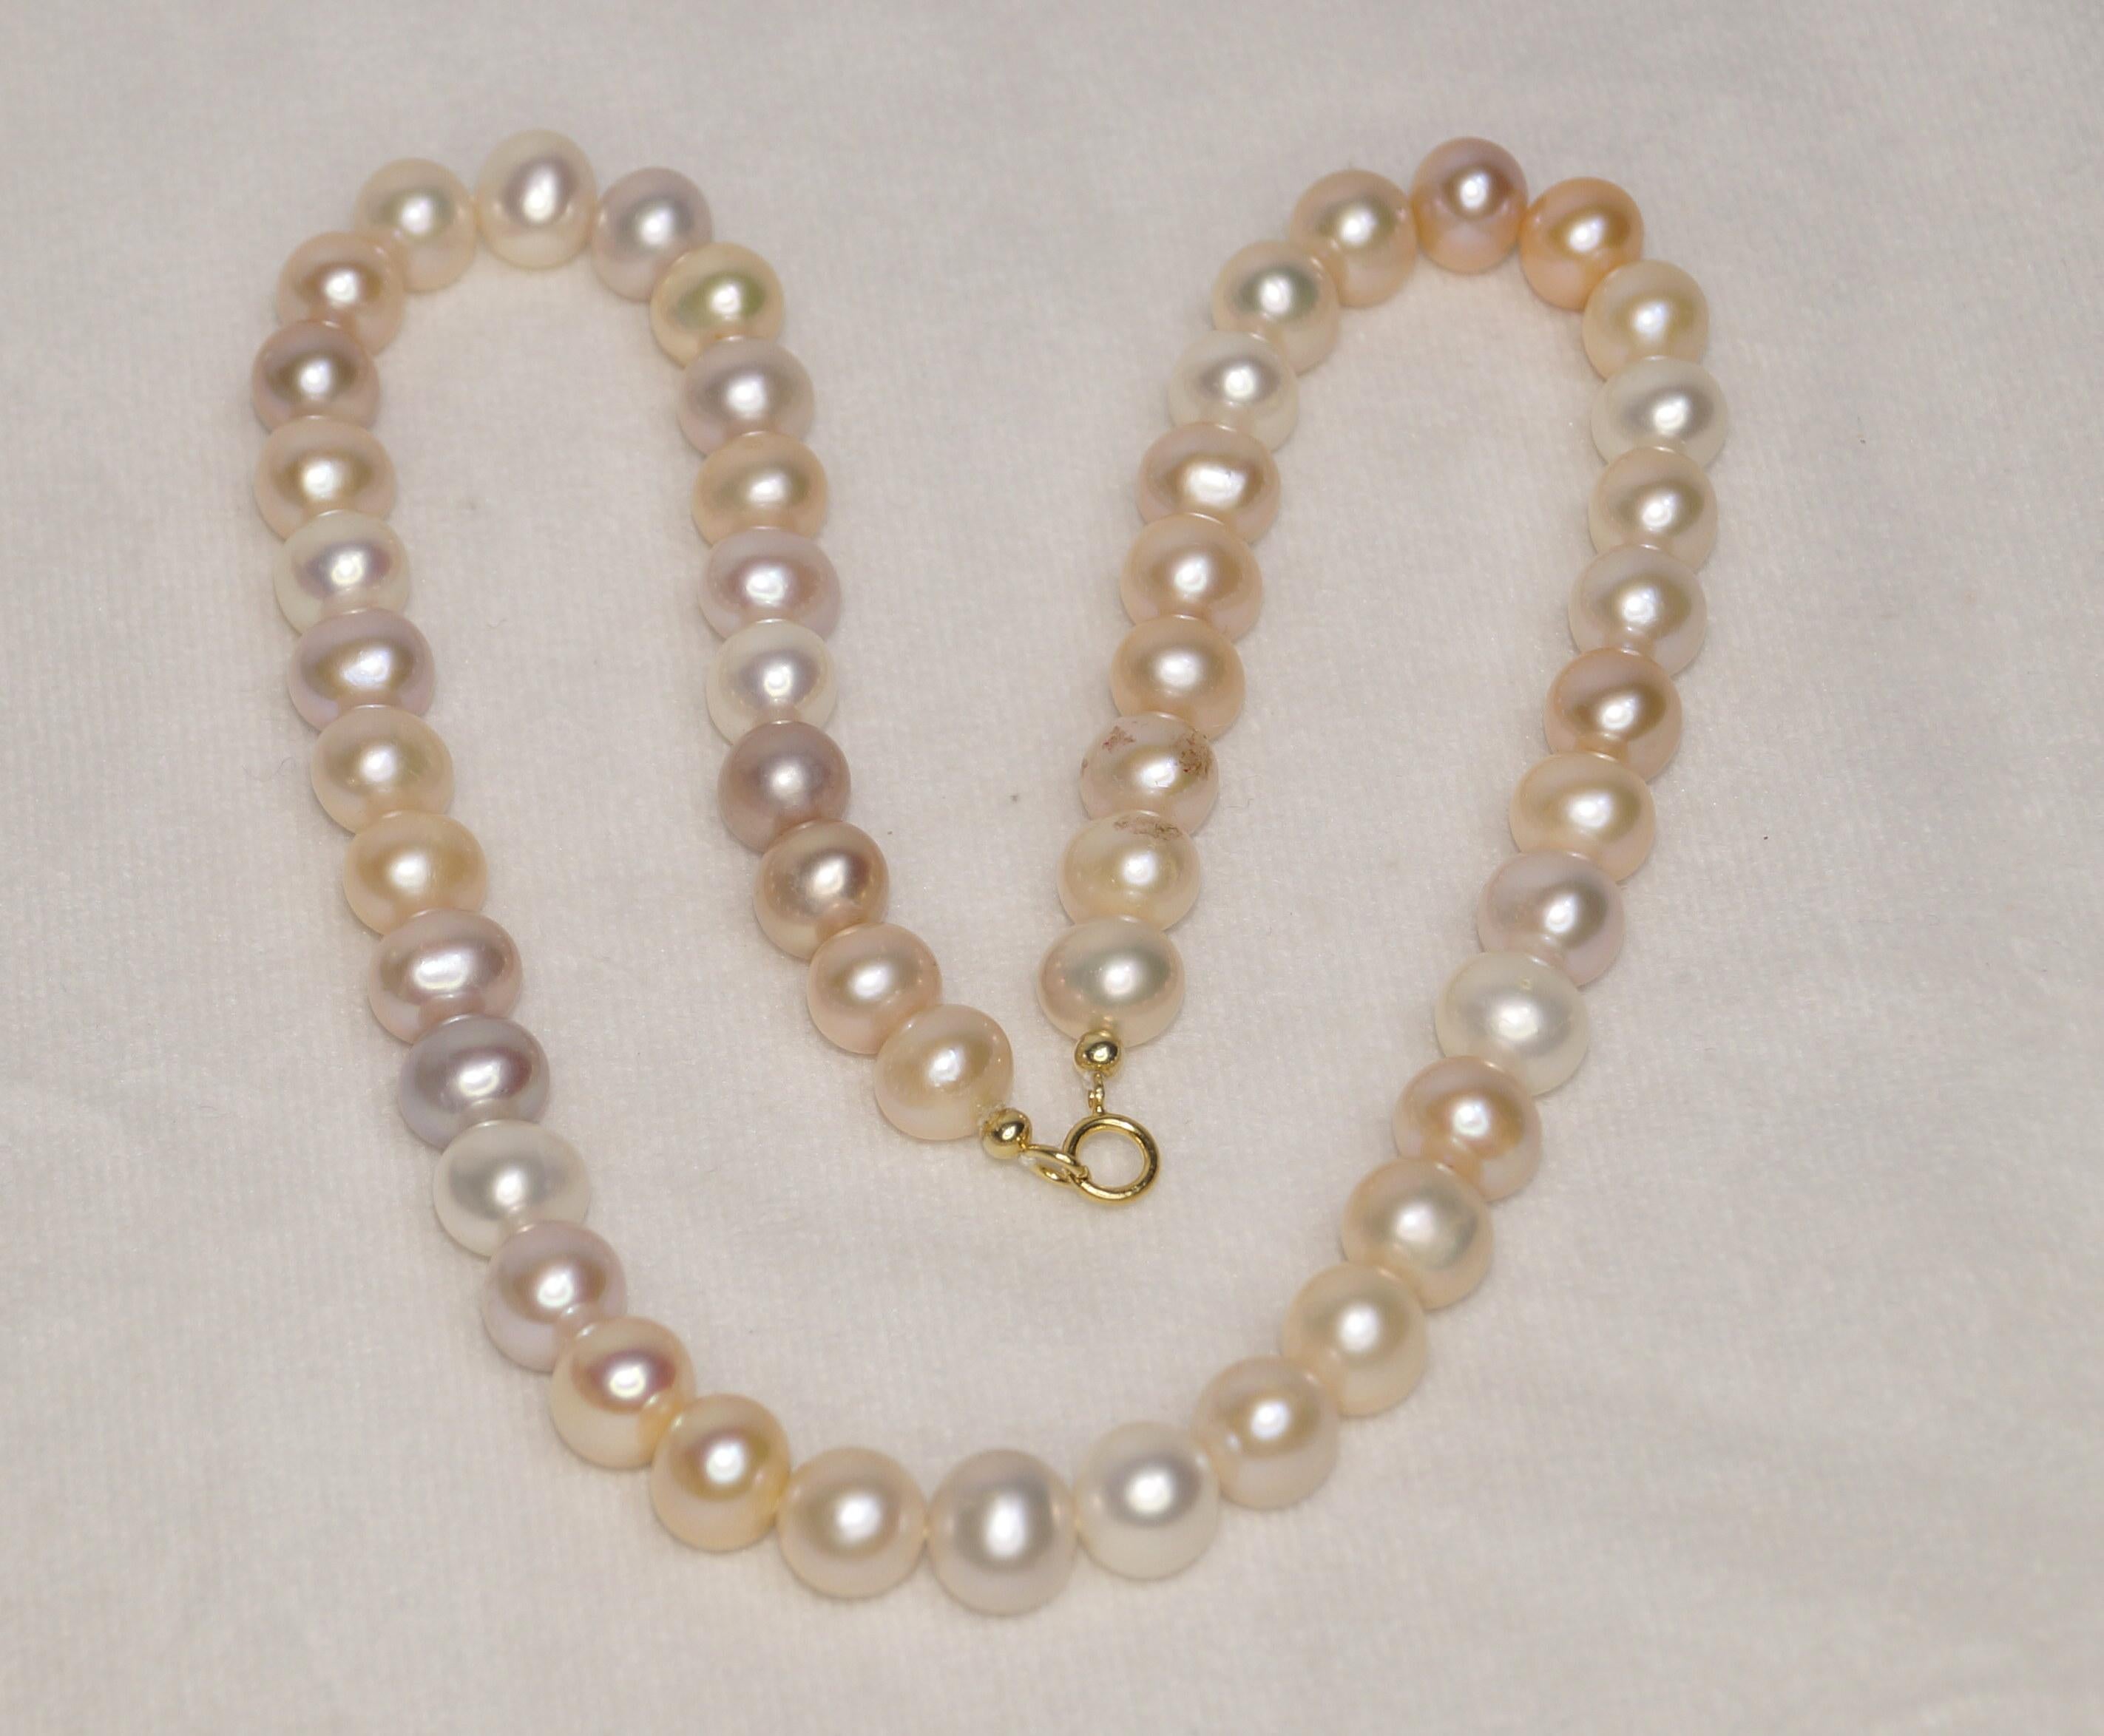 14k Gold Golden Cream mix Pearl necklace 14mm Freshwater Round Pearl necklace 3